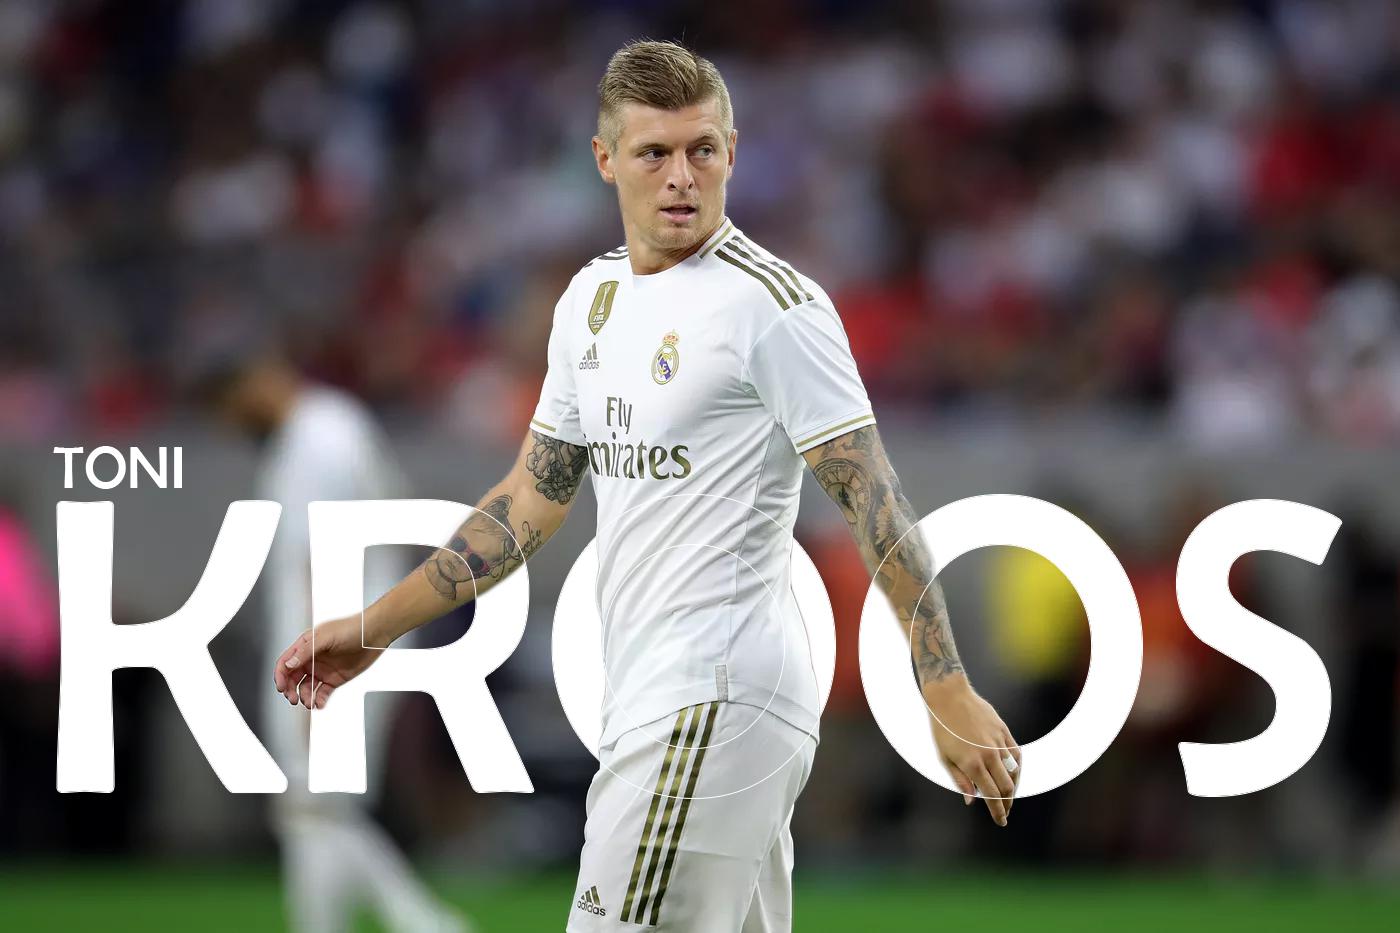 My try to make a Toni Kroos wallpaper. Decent. Simple. Yet, effective. Like the player he is!